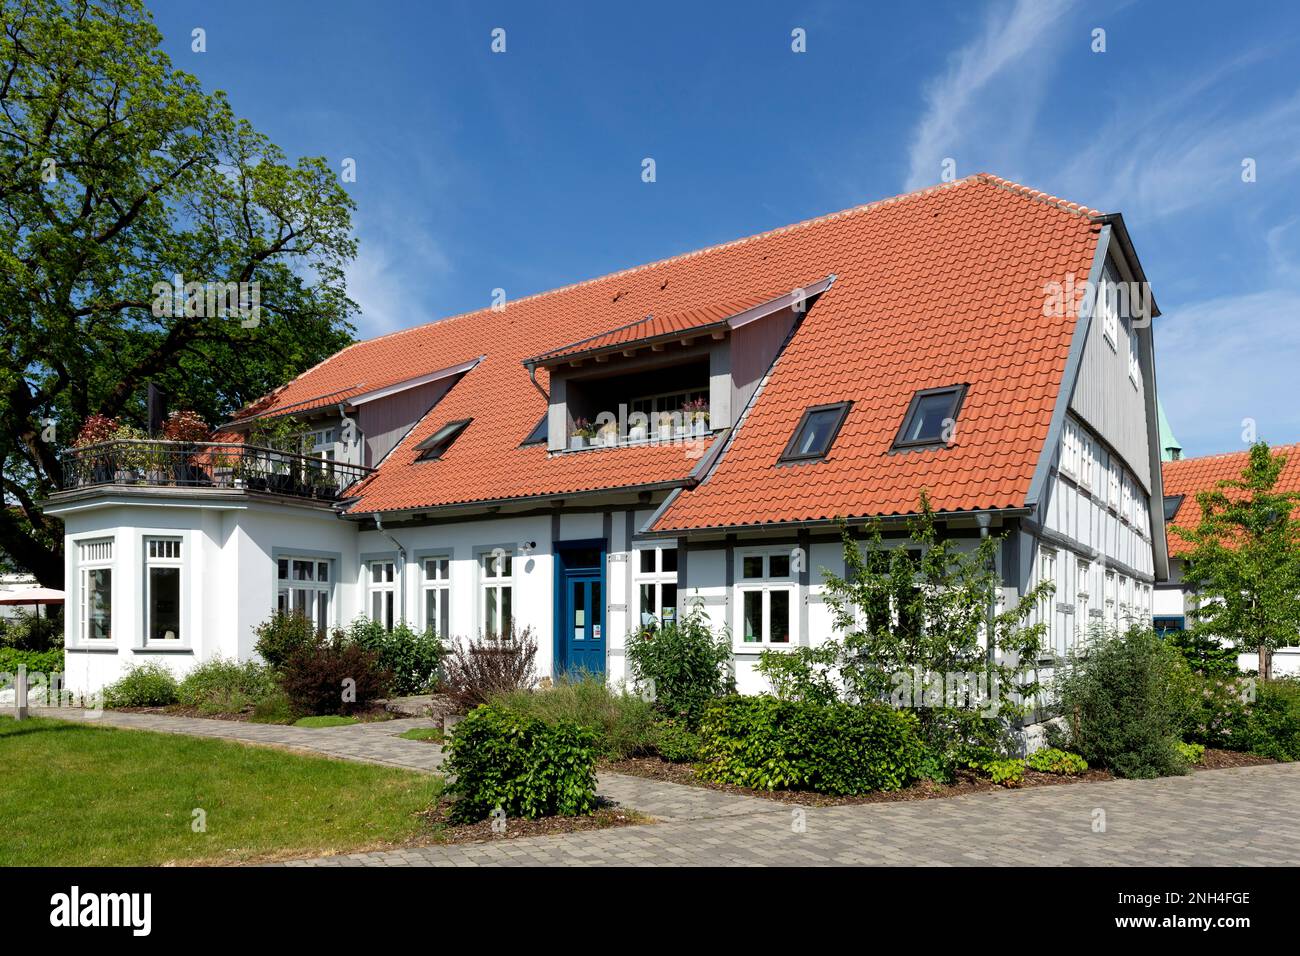 Frommenhof, former farmstead, now a municipal library, bookshop and restaurant, Dissen am Teutoburger Wald, Lower Saxony, Germany Stock Photo